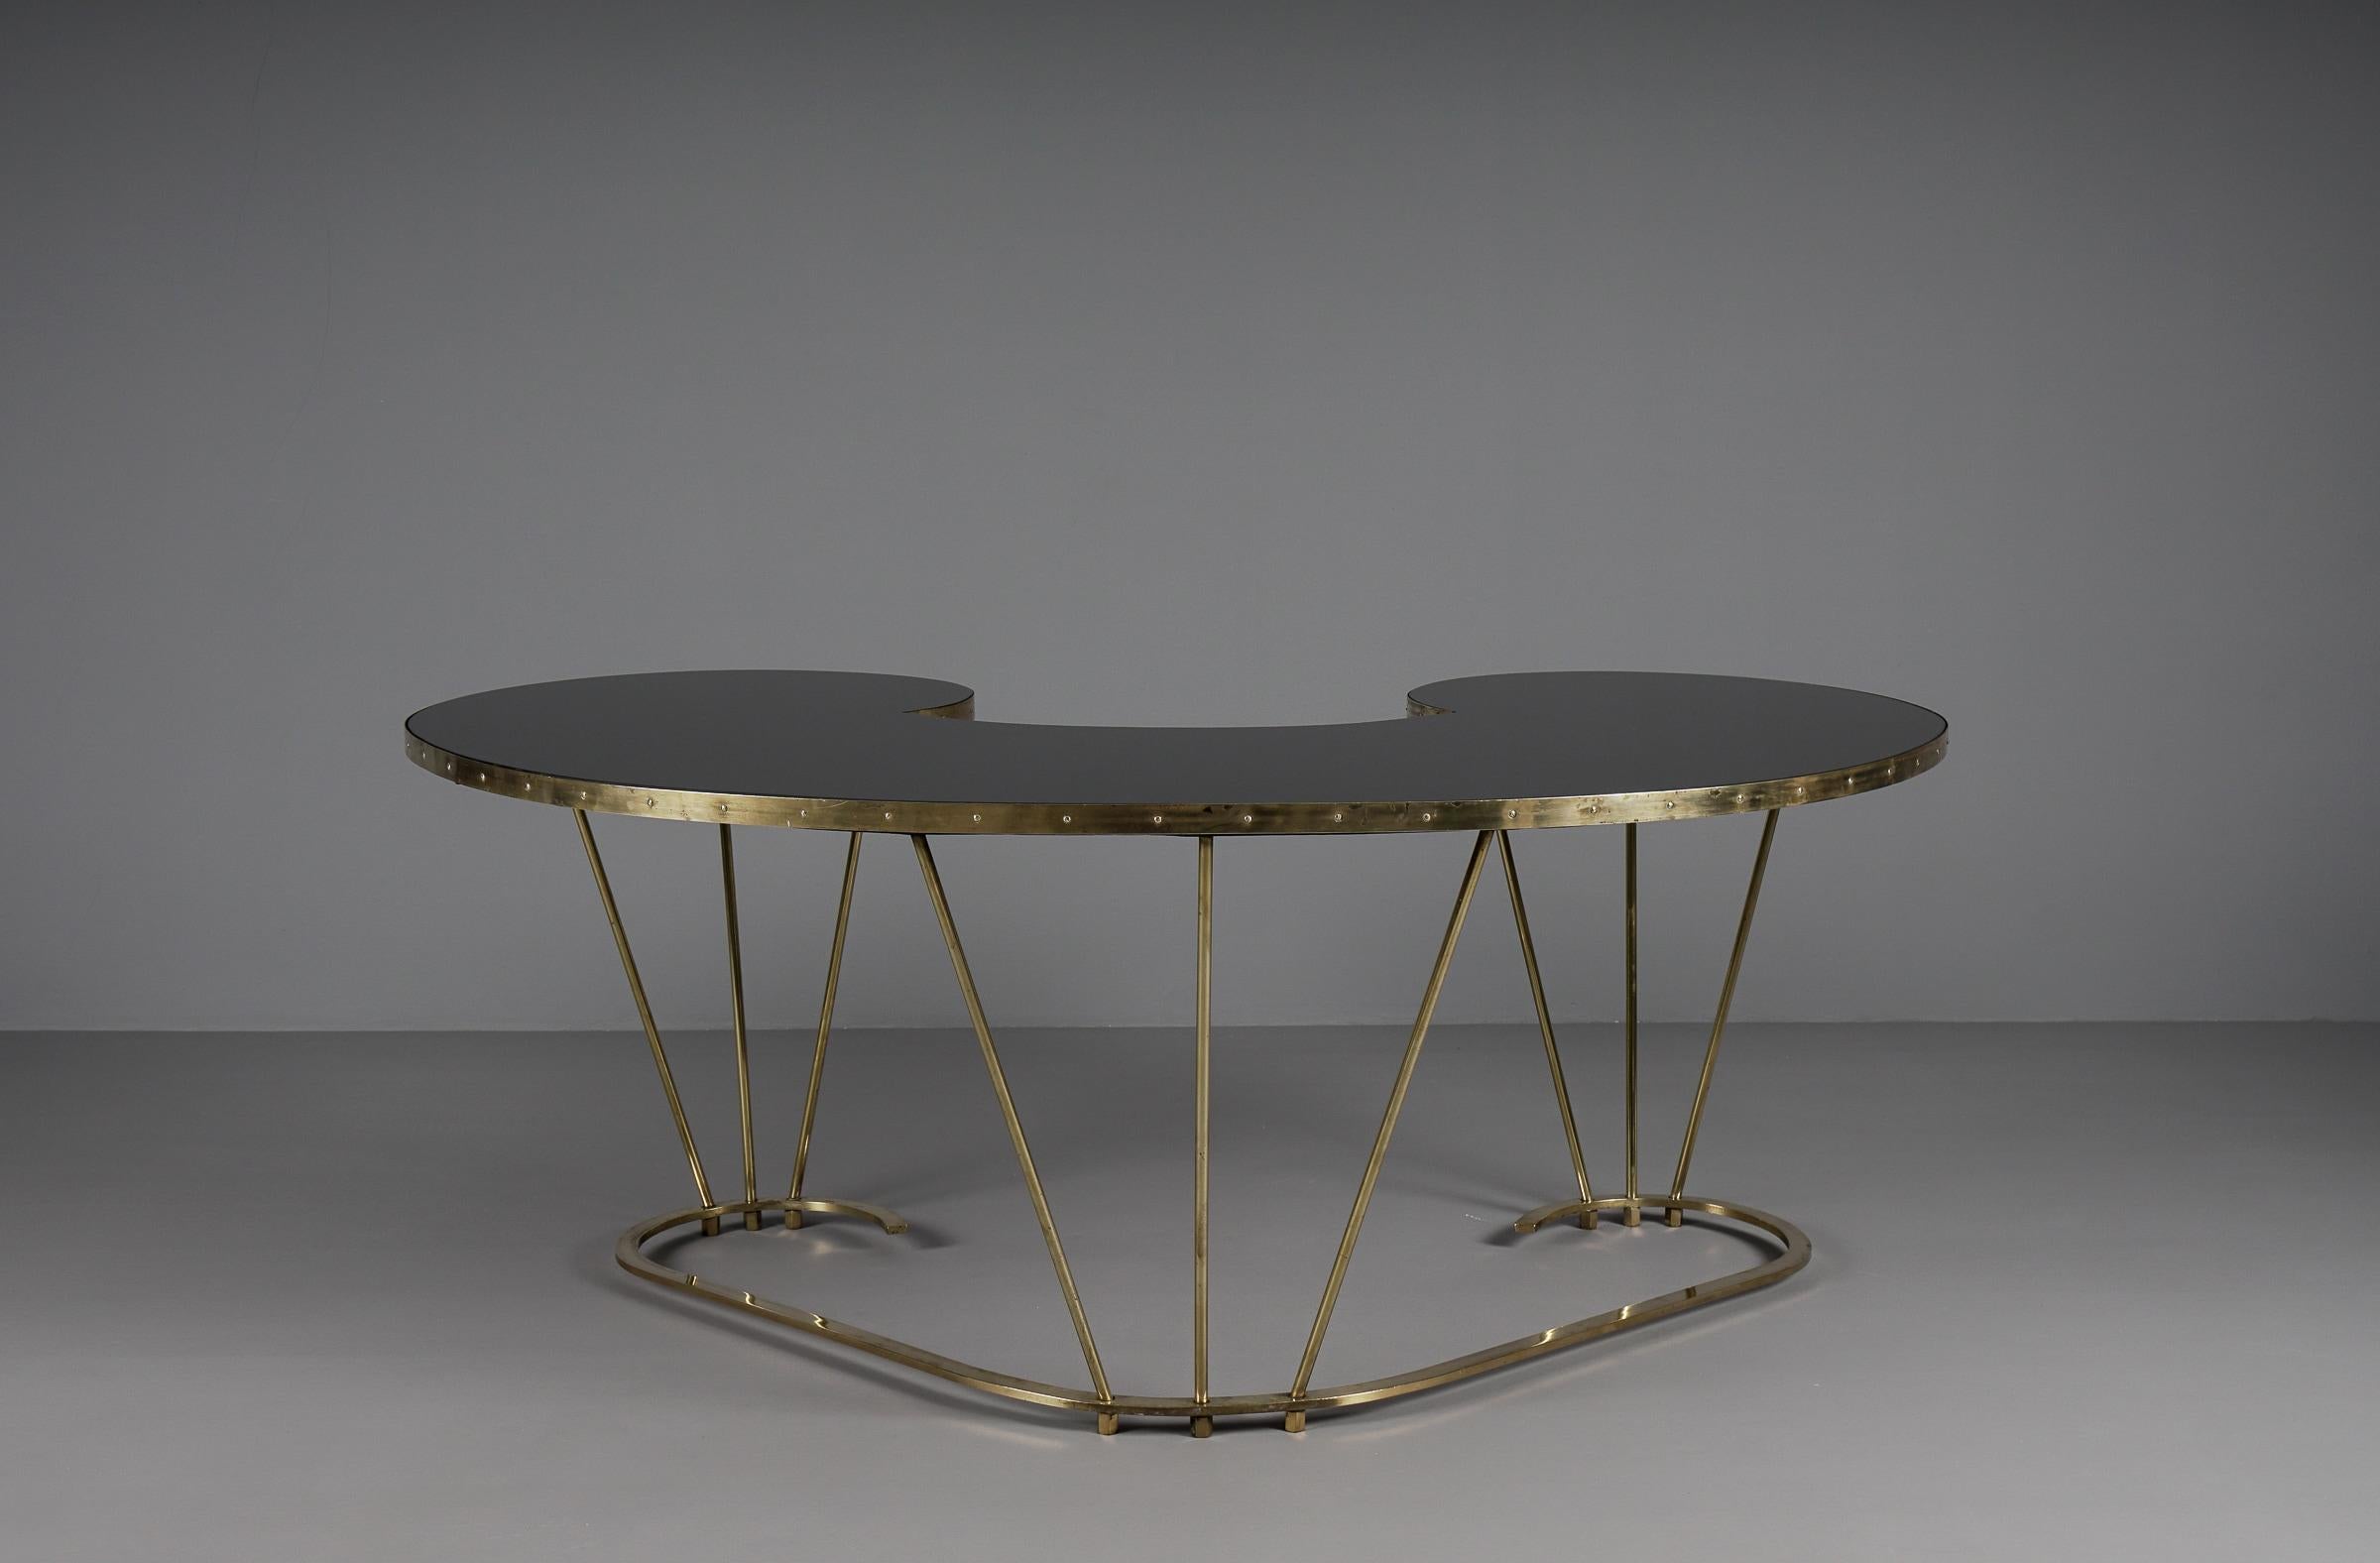 Unique Desk or Dressing Table Made of Solid Brass and Black Glass, 1950s, Italy For Sale 1